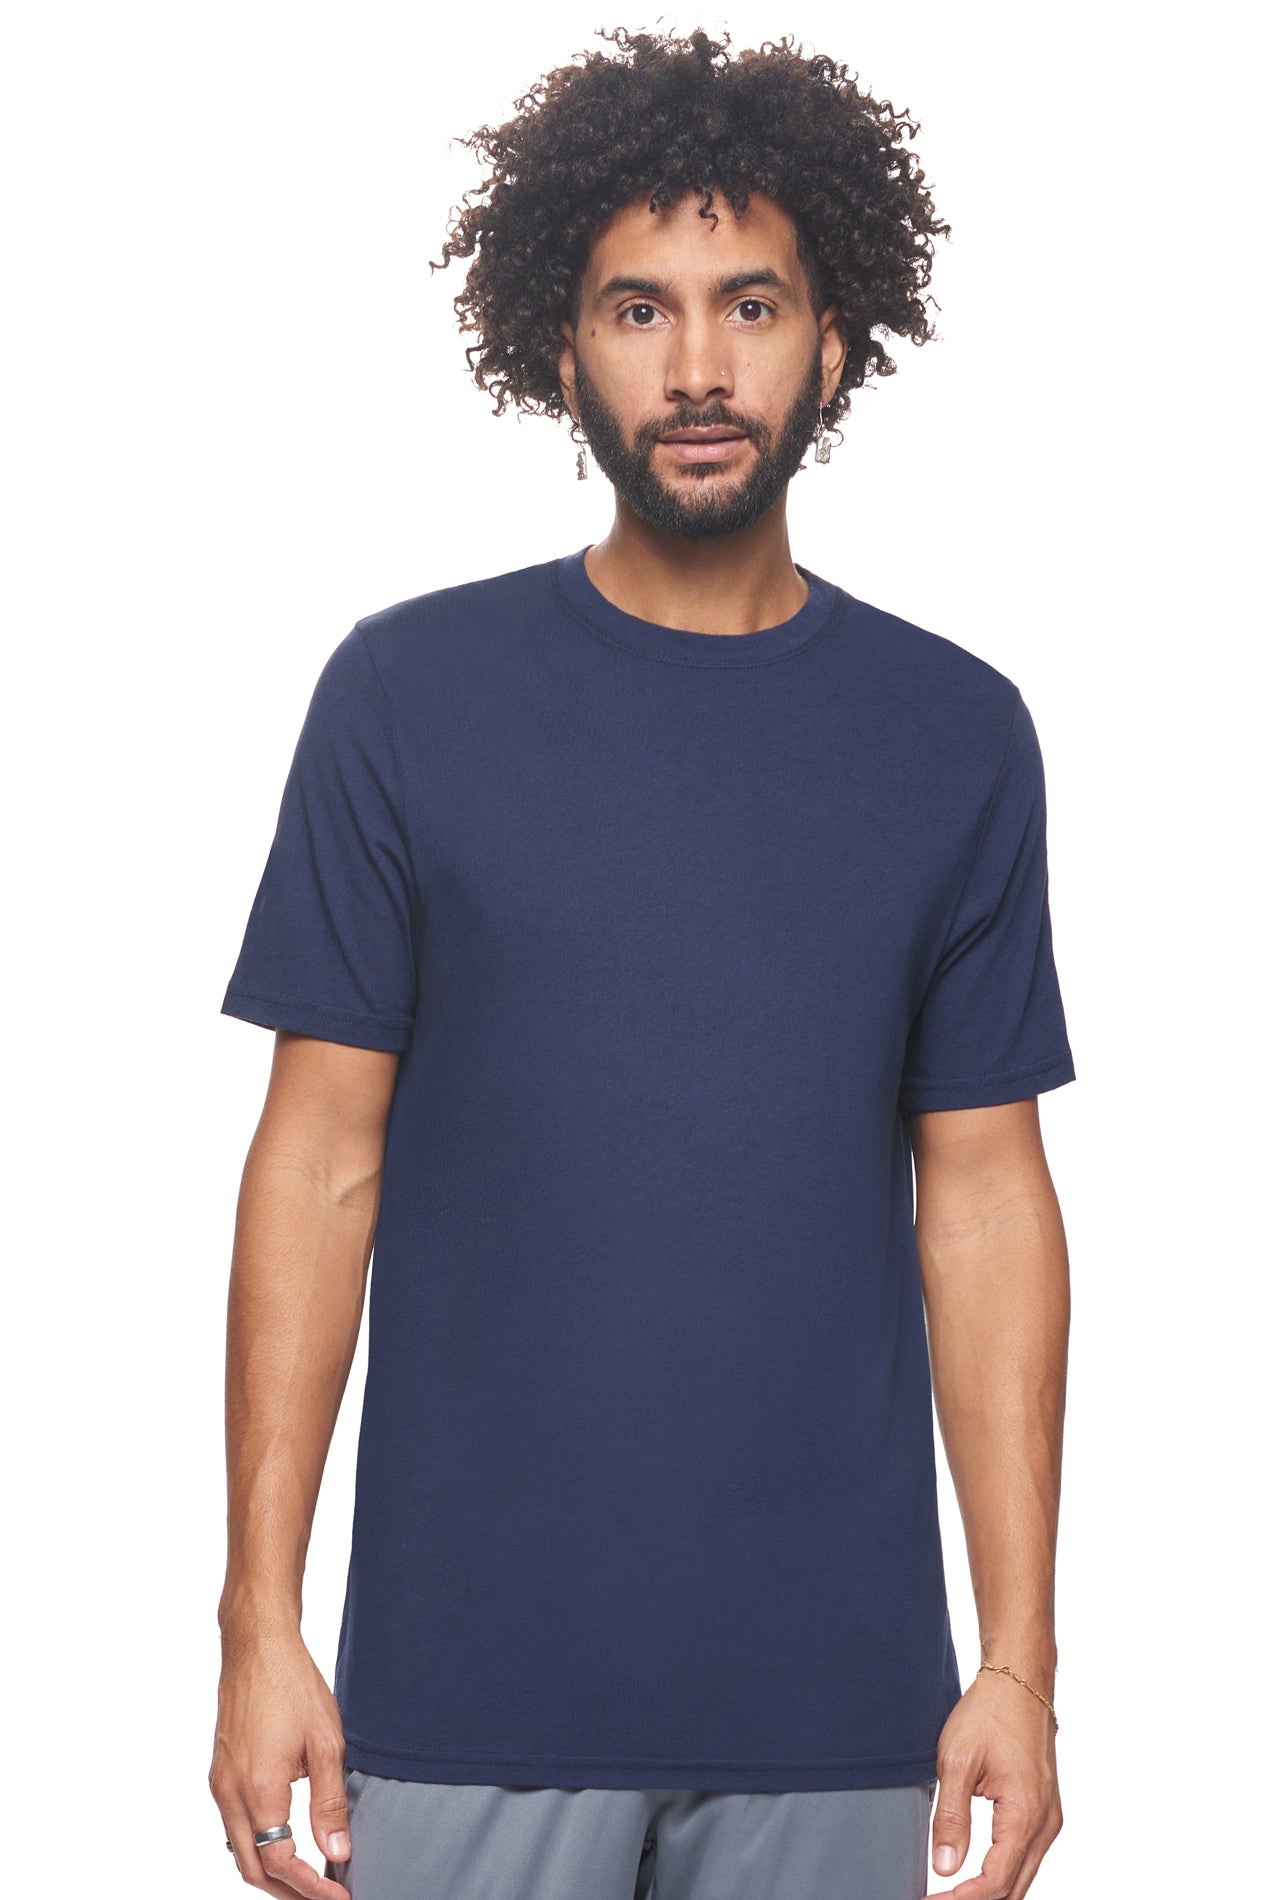 Expert Brand Wholesale Sustainable Eco-Friendly Apparel Micromodal Cotton Men's Crewneck T-Shirt Made in USA navy#navy